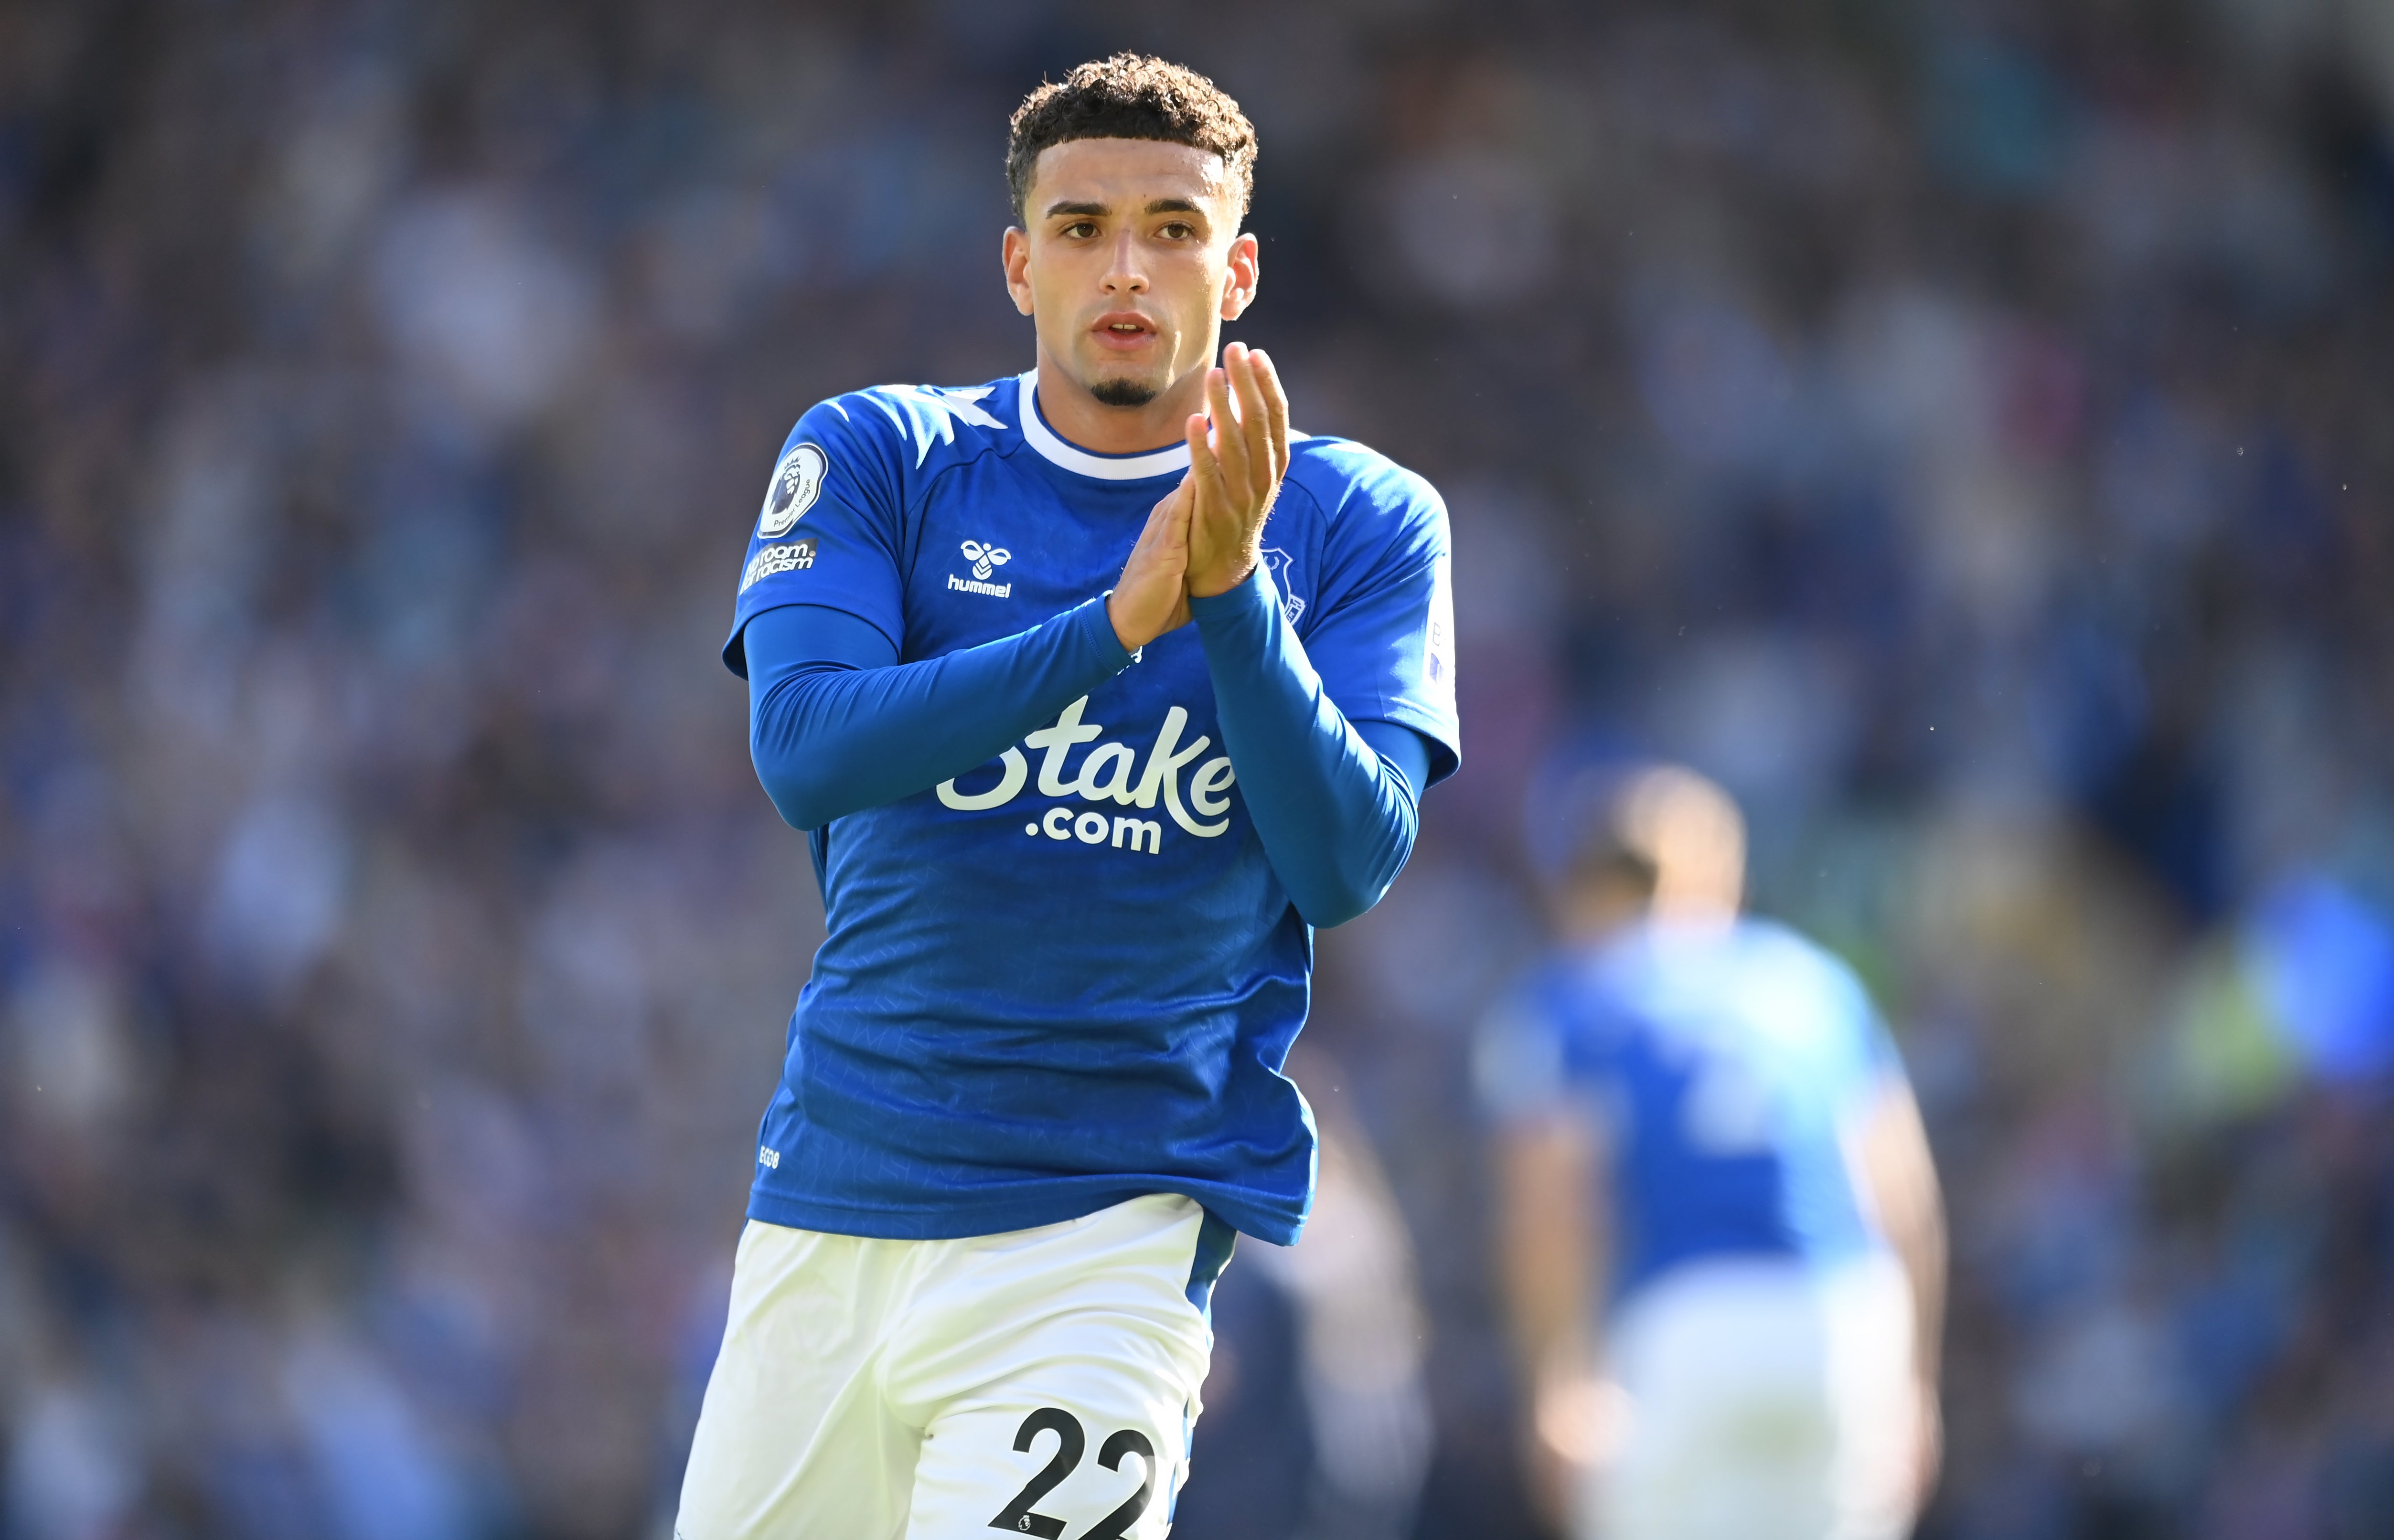 The 26-year-old has fallen out of favour after injuries curtailed his progress with Everton.